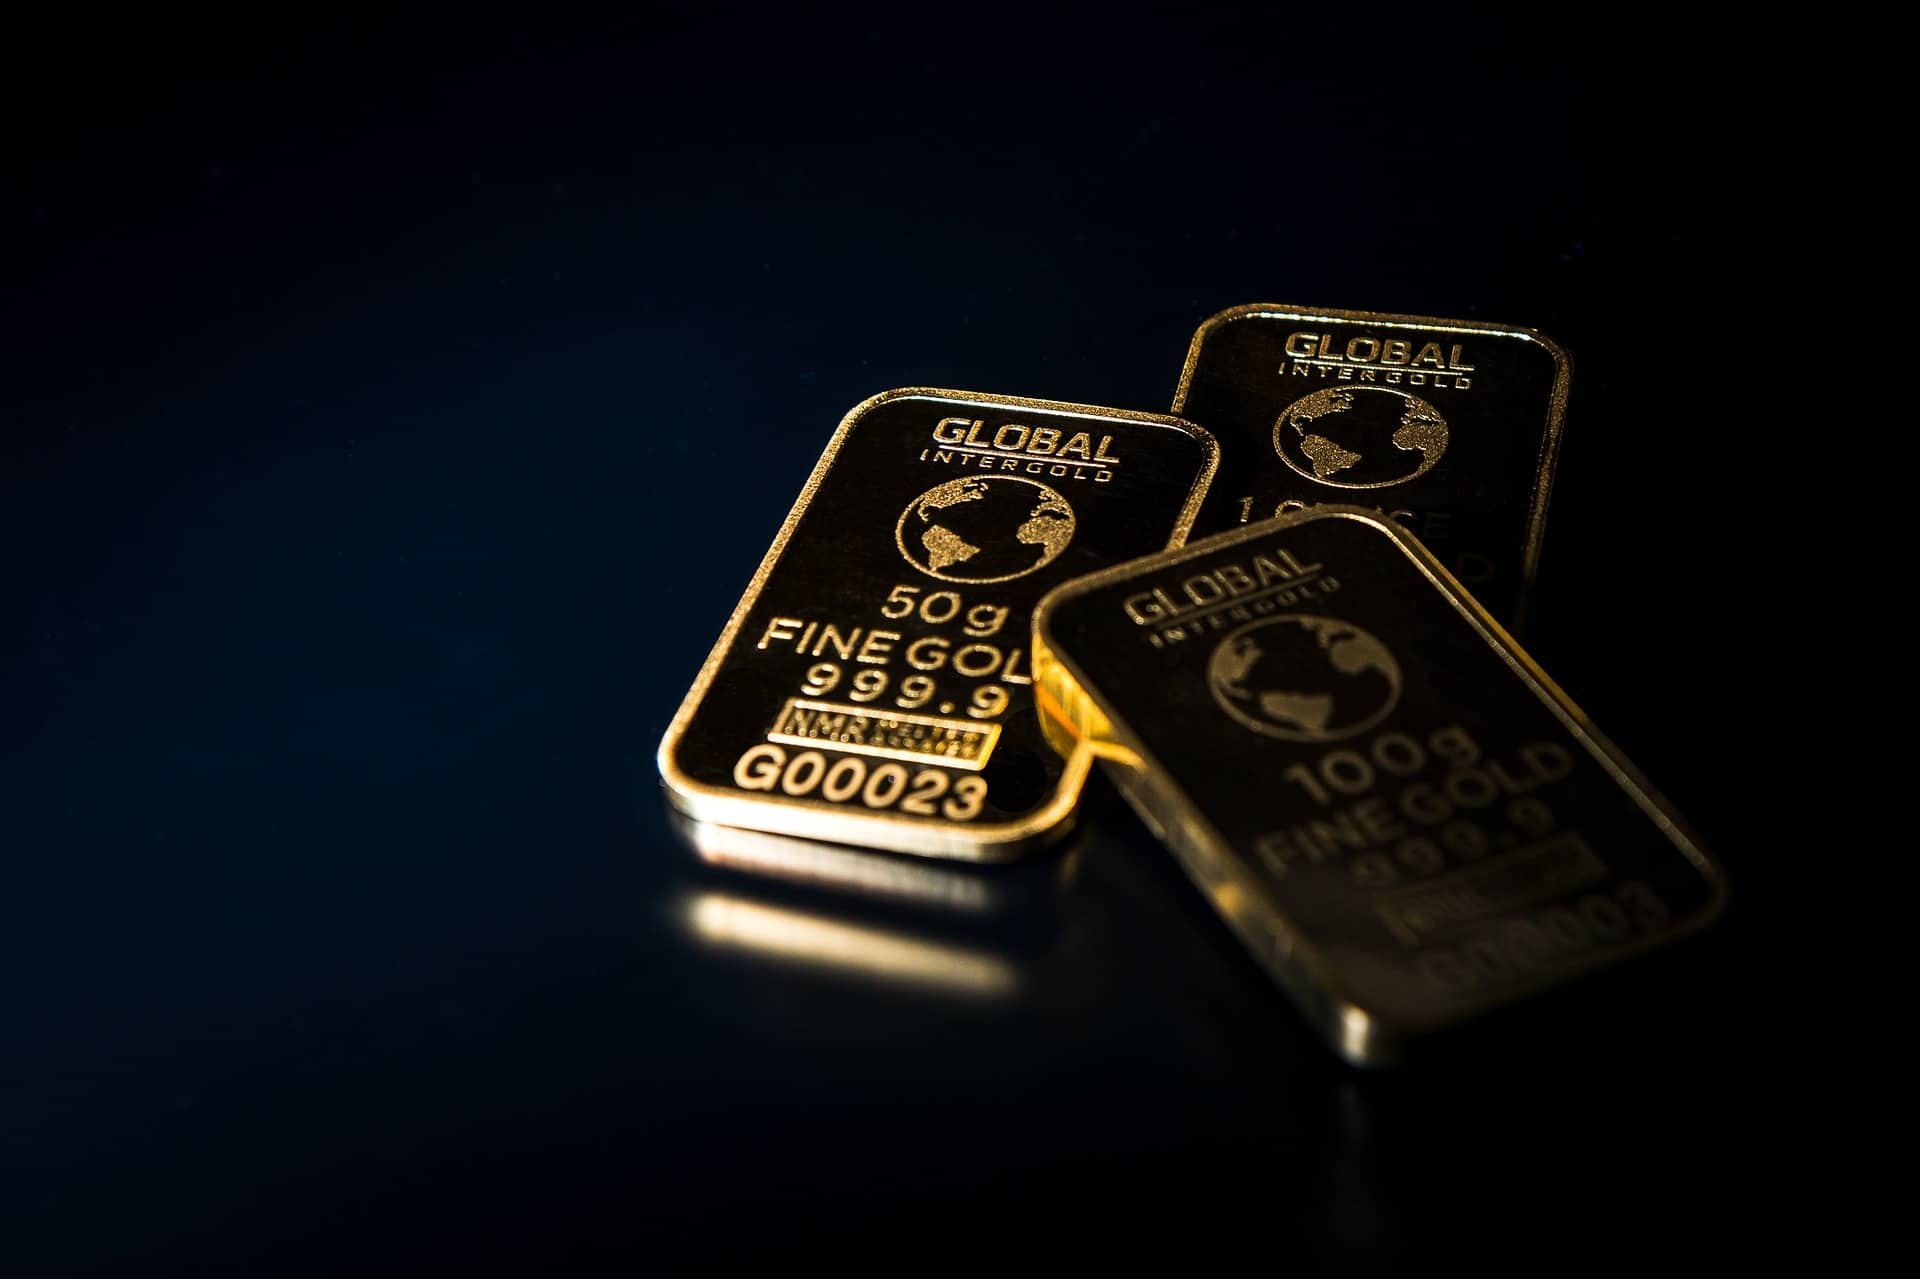 Gold prices fell on March 16 after the US Federal Reserve raised interest rates by a quarter of a percentage point. Gold April futures contact settled at $1909.20 per troy ounce with a loss of 1.06 percent and silver May futures contract settled at $24.71 per troy ounce with a loss of 1.79 percent. Gold is highly sensitive to interest rates, as an increase in rates increases the opportunity cost of holding non-yielding bullion, while boosting the dollar, in which it is priced.